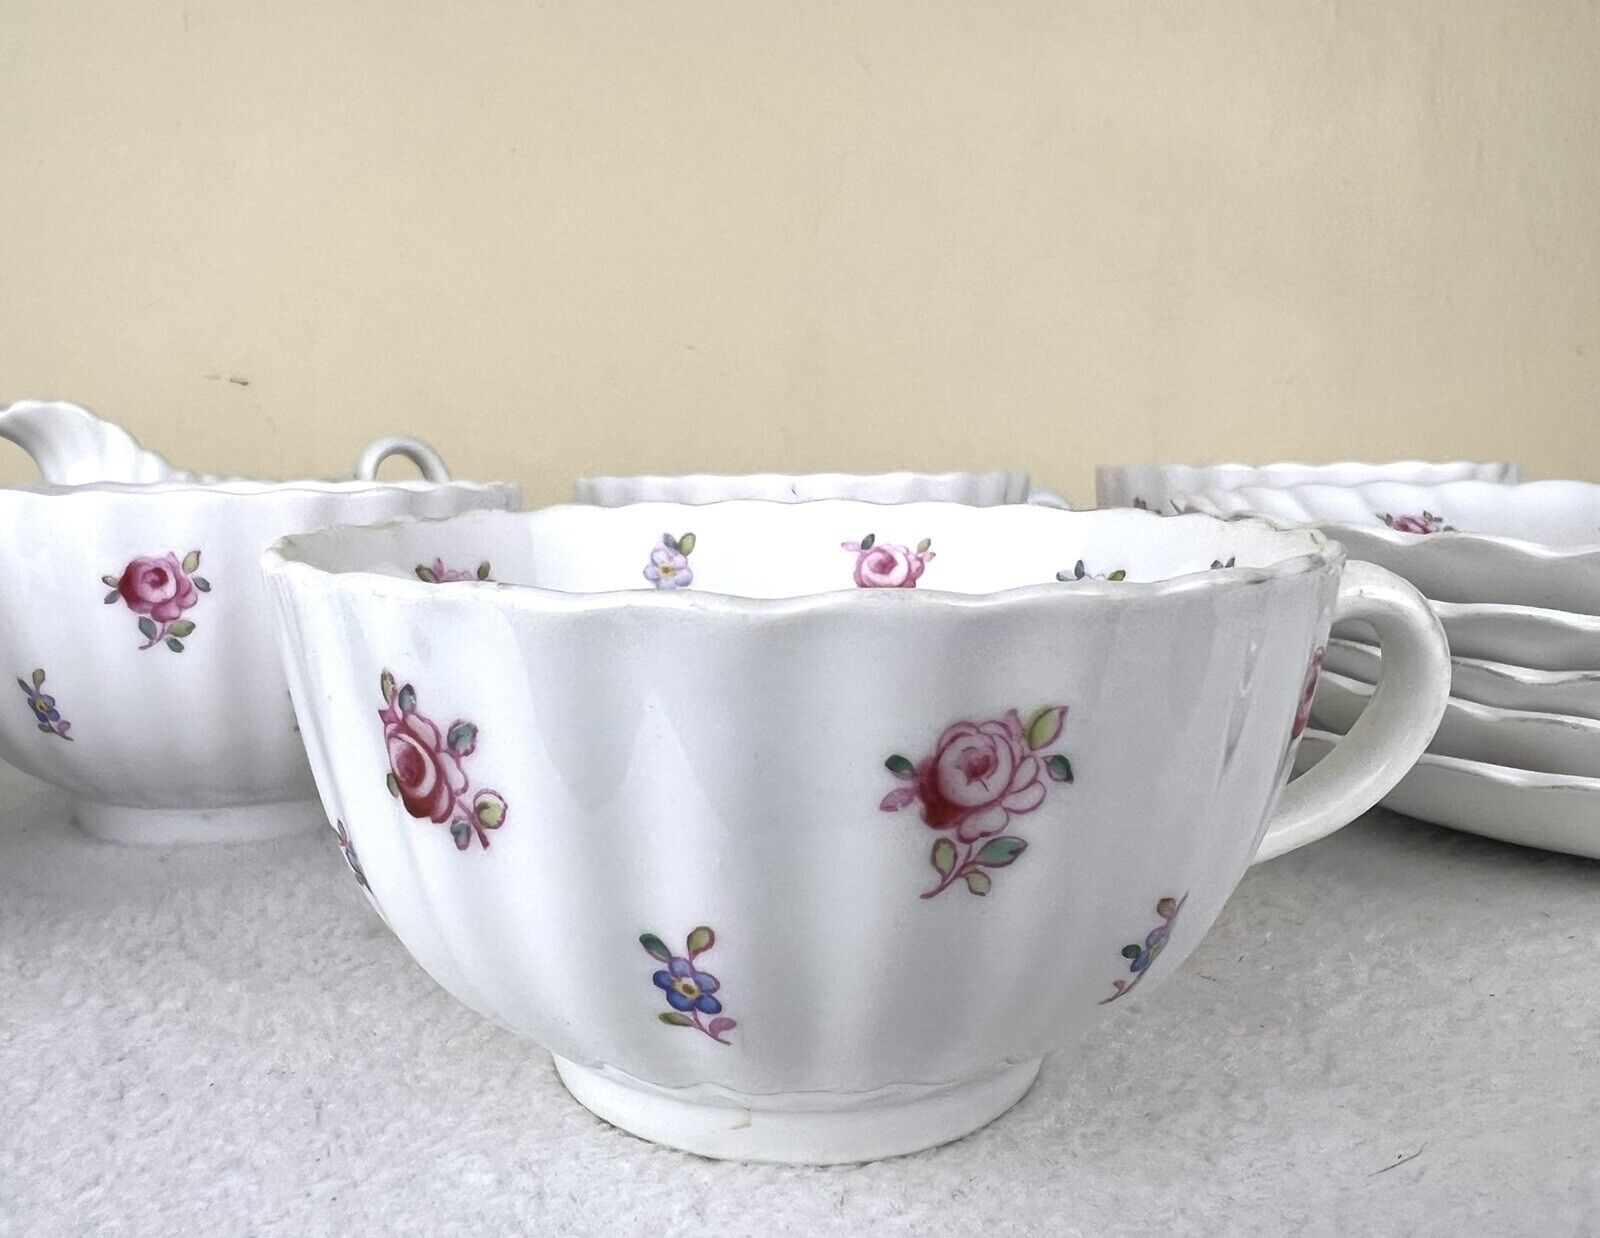 Spode Bone China England Dimity Pattern Teacups And Saucers, Sugar And Creamer